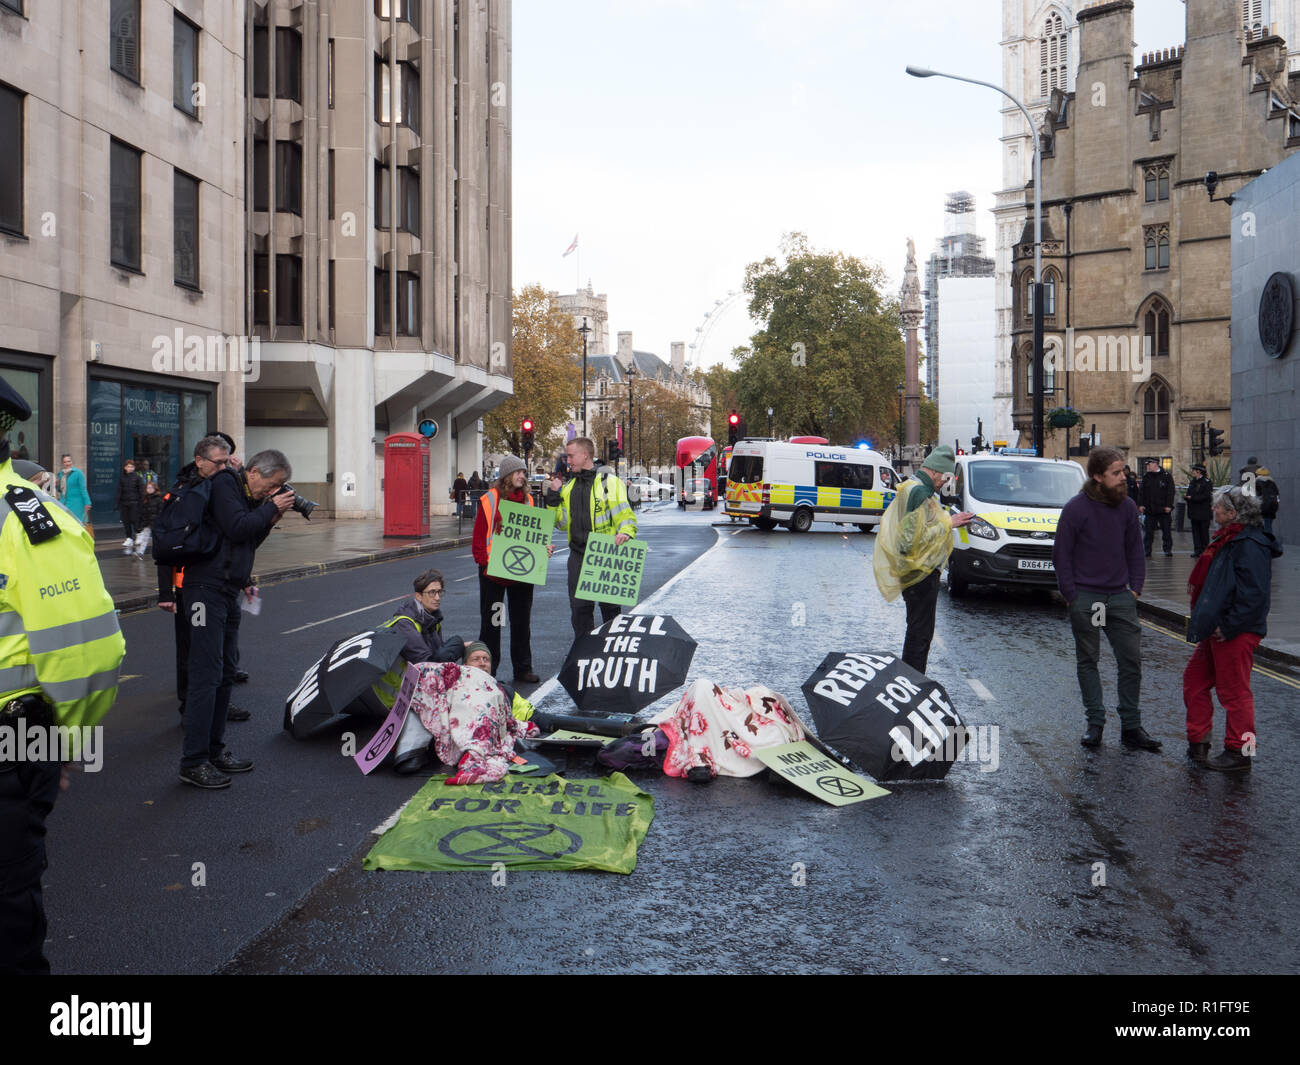 London, UK. 12th November 2018. Protesters of Extinction Rebellion holding a peaceful demonstration in front of the Department for Business, Energy & Industrial Strategy. Police have closed part of Victoria Street. Some protesters, chained to each other with a plastic tube, laying in the middle of the road. Credit: Joe Kuis / Alamy Live News Stock Photo